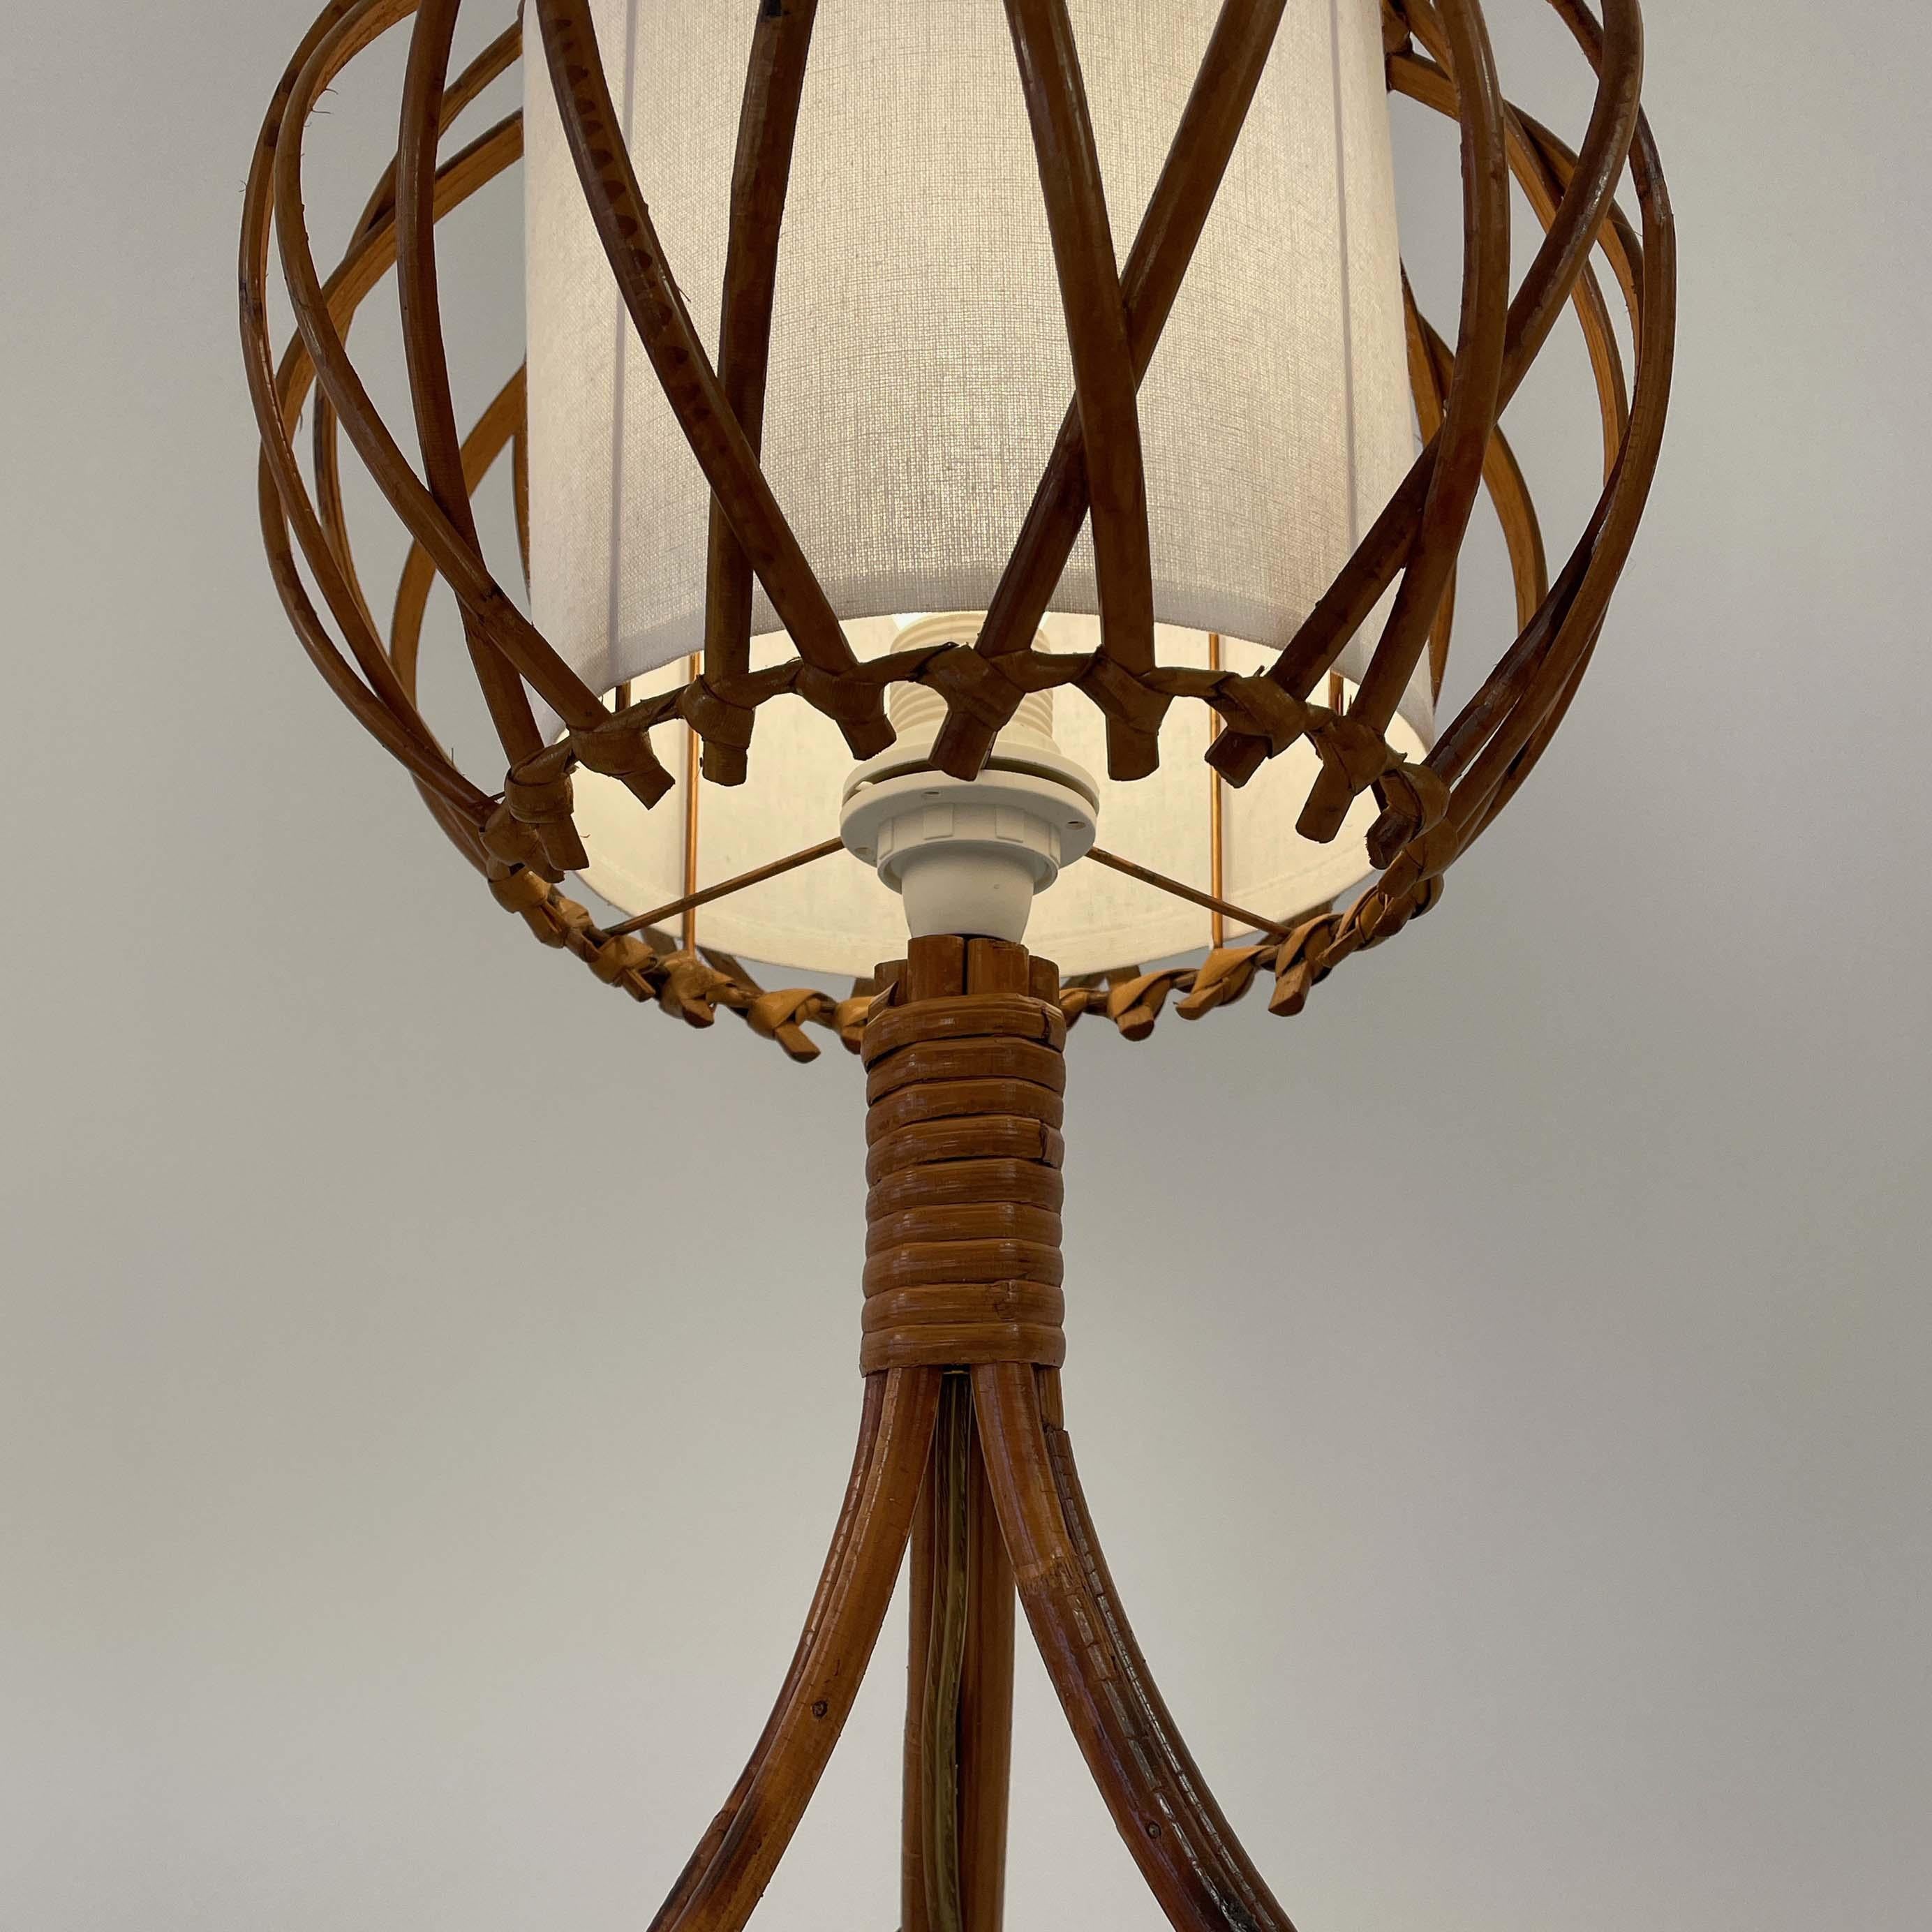 Rattan Bamboo & Fabric Table Lamp, Louis SOGNOT France 1950s For Sale 1